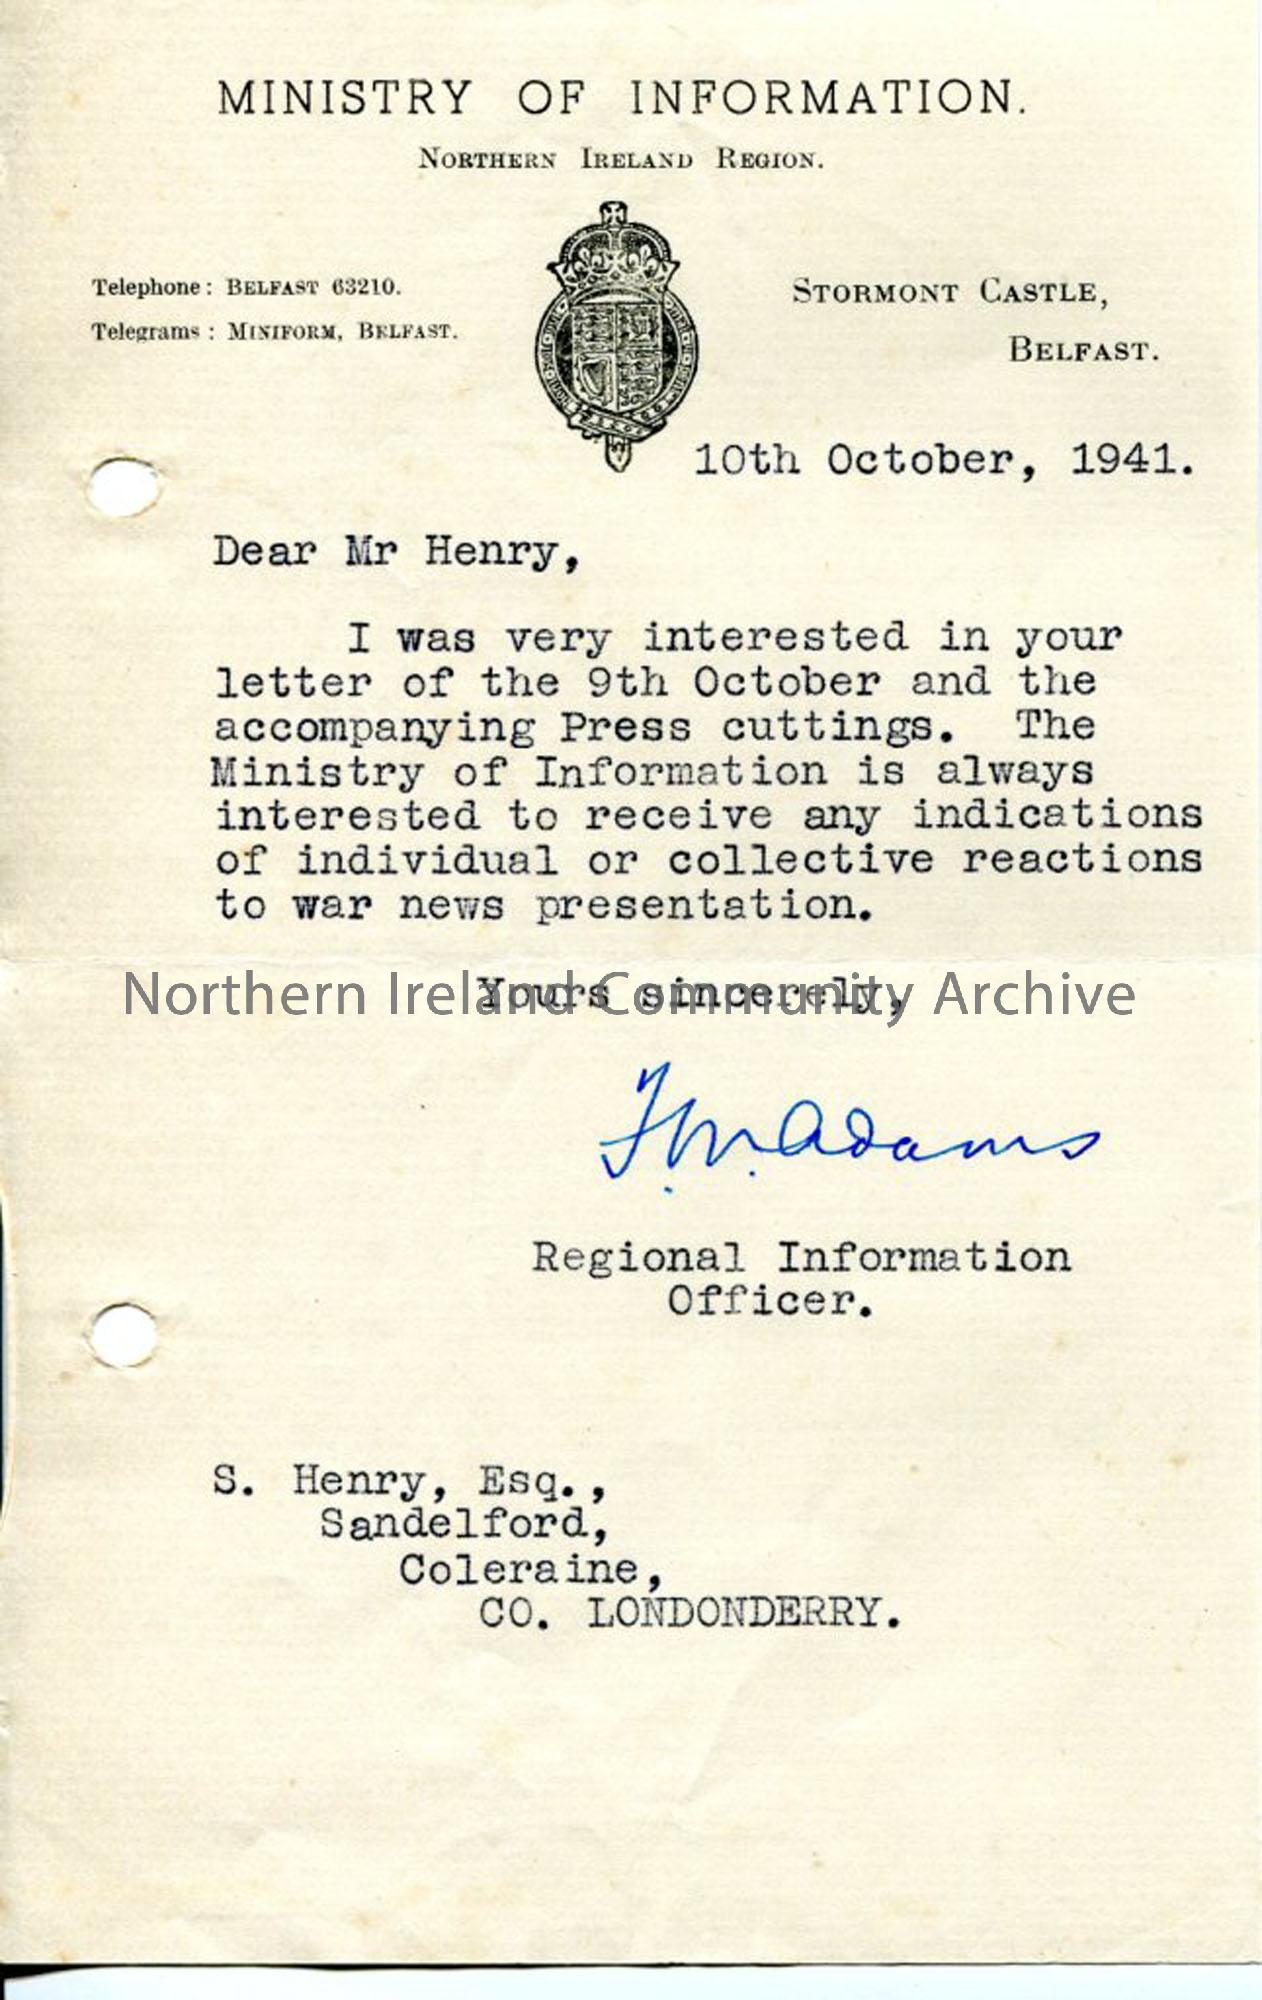 Letter from Ministry of Information to Sam Henry (3267)